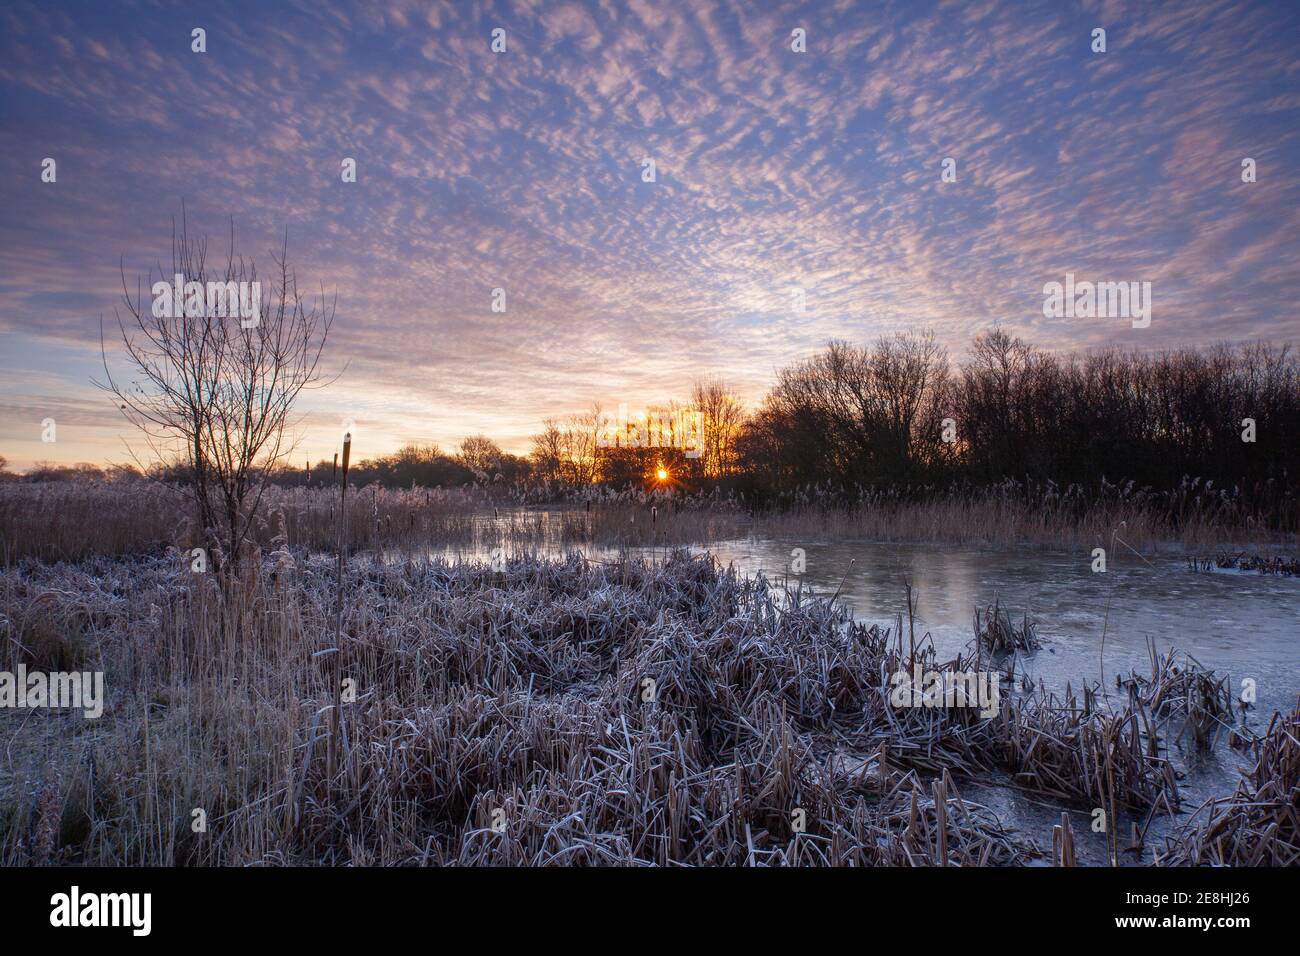 Barton-upon-Humber, North Lincolnshire, UK. 31st January 2021. UK Weather: A cold and frosty sunrise on the last day of January. Credit: LEE BEEL/Alamy Live News. Stock Photo